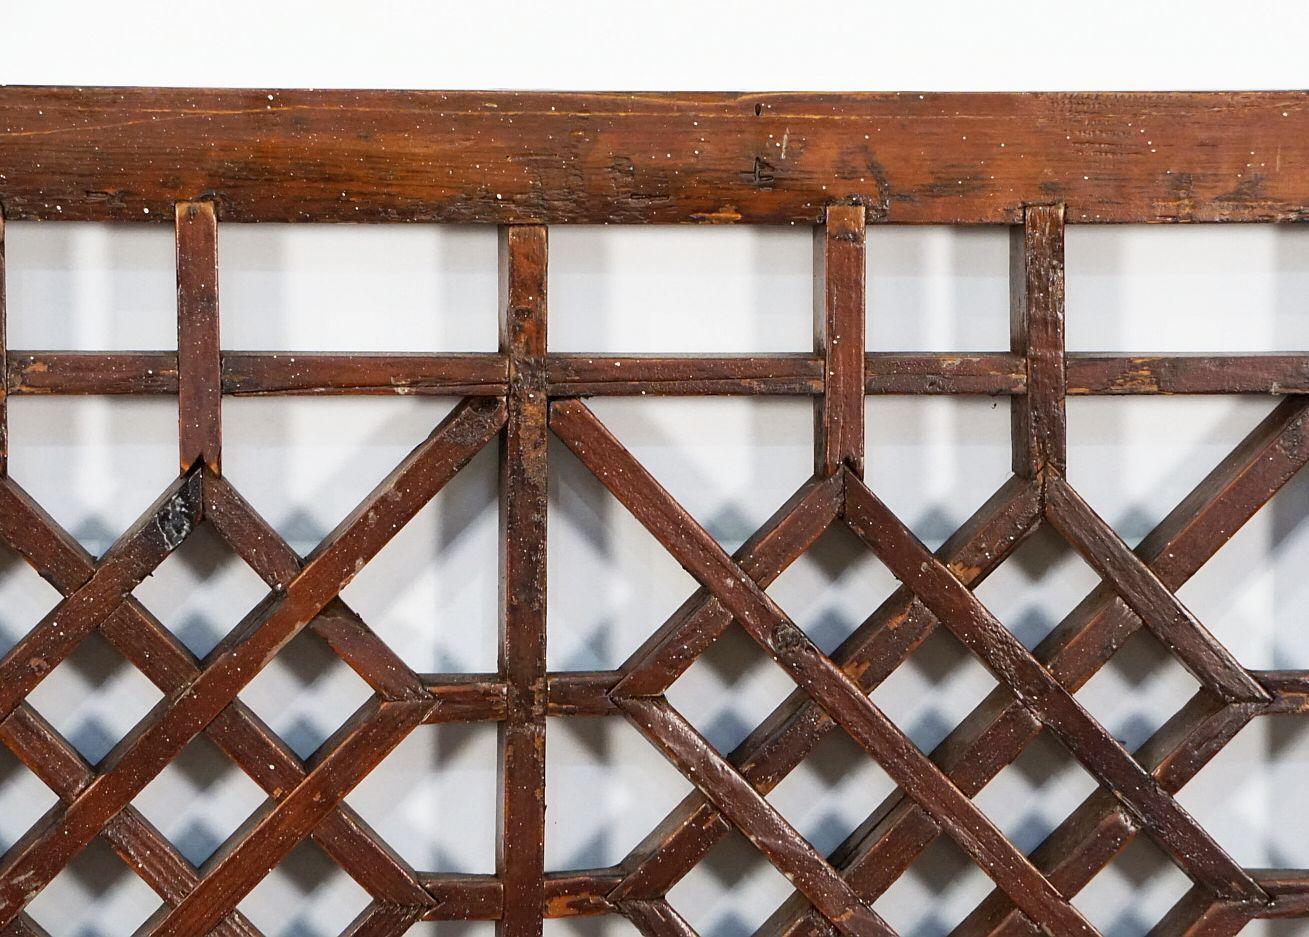 Chinese Decorative Lattice Wood Panels or Window Screens - Sold as a Set 12